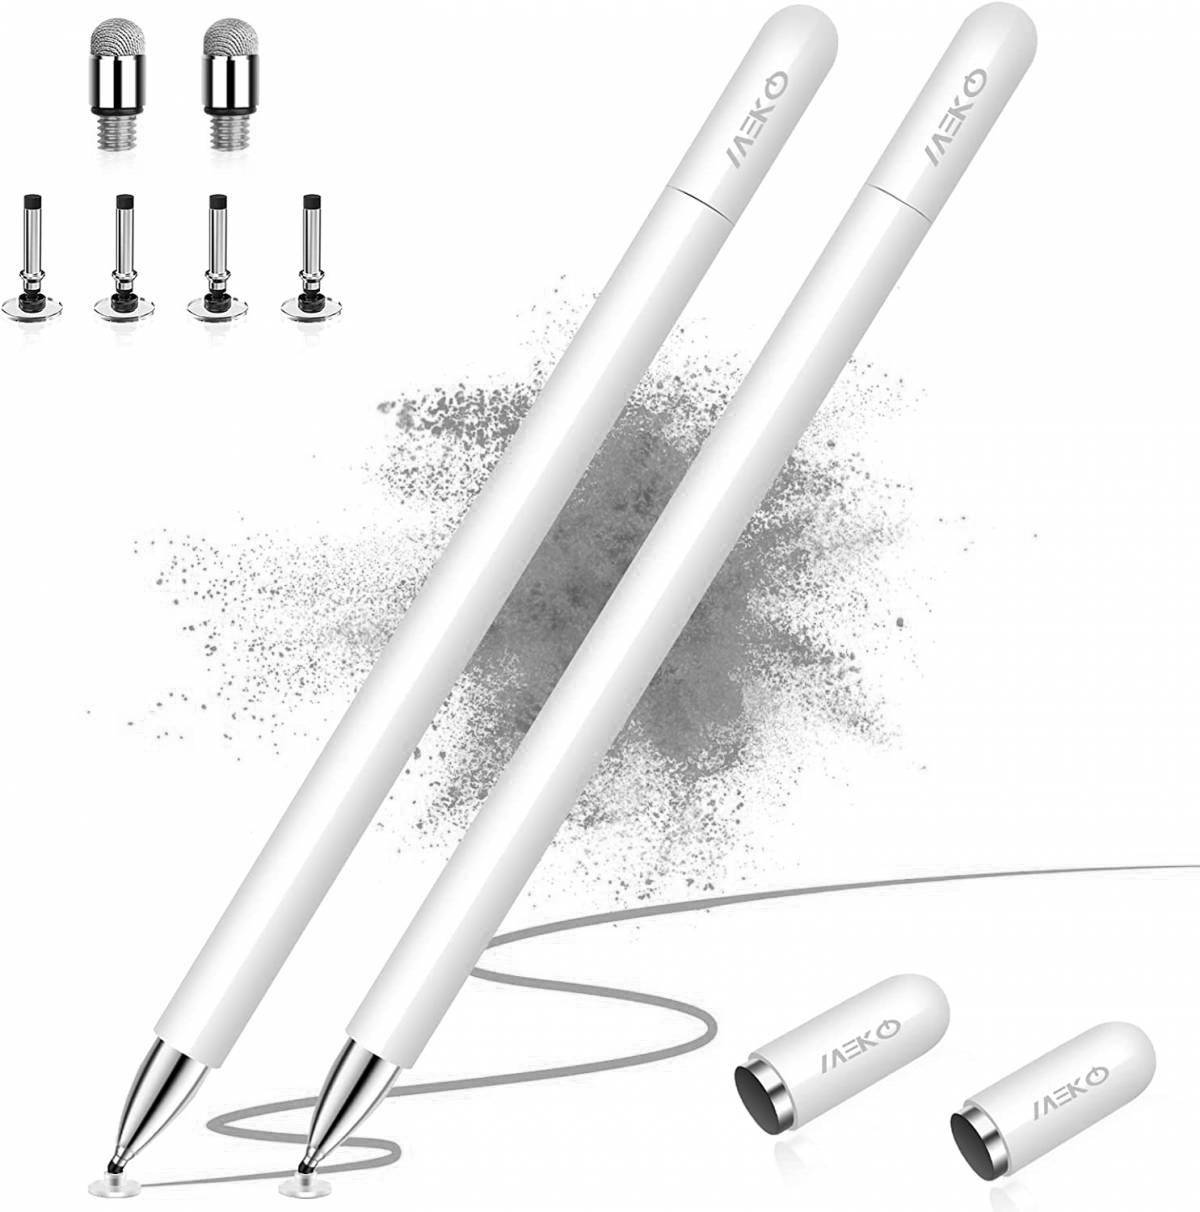 Fun stylus for coloring pages